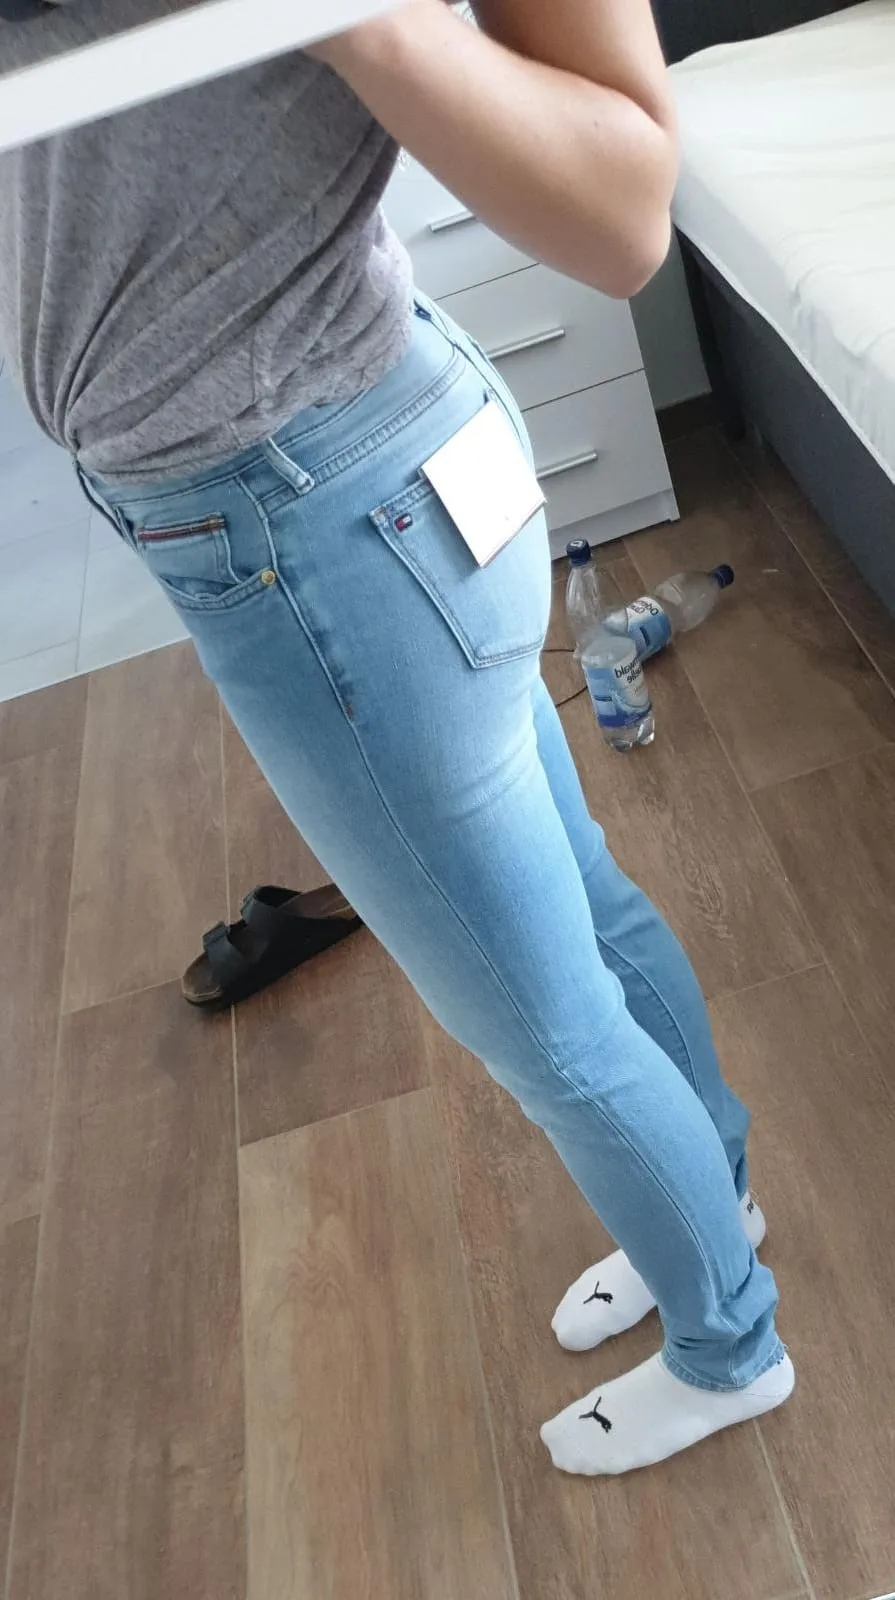 A sexy high quality photo of a girl making a selfie of her ass in tight blue jeans.